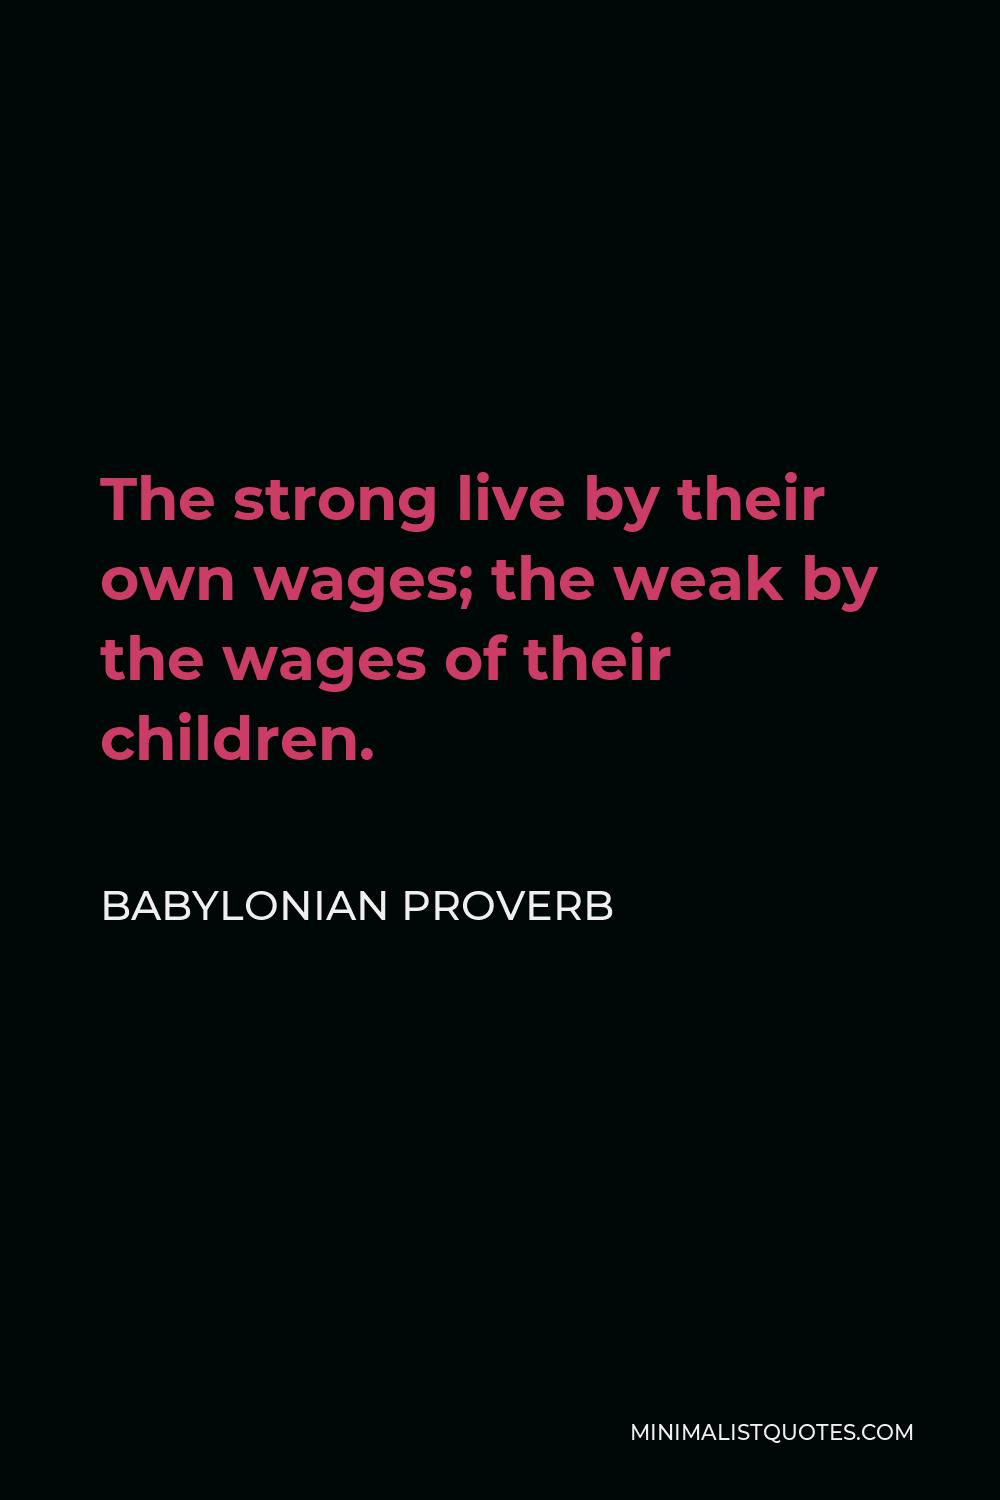 Babylonian Proverb Quote - The strong live by their own wages; the weak by the wages of their children.